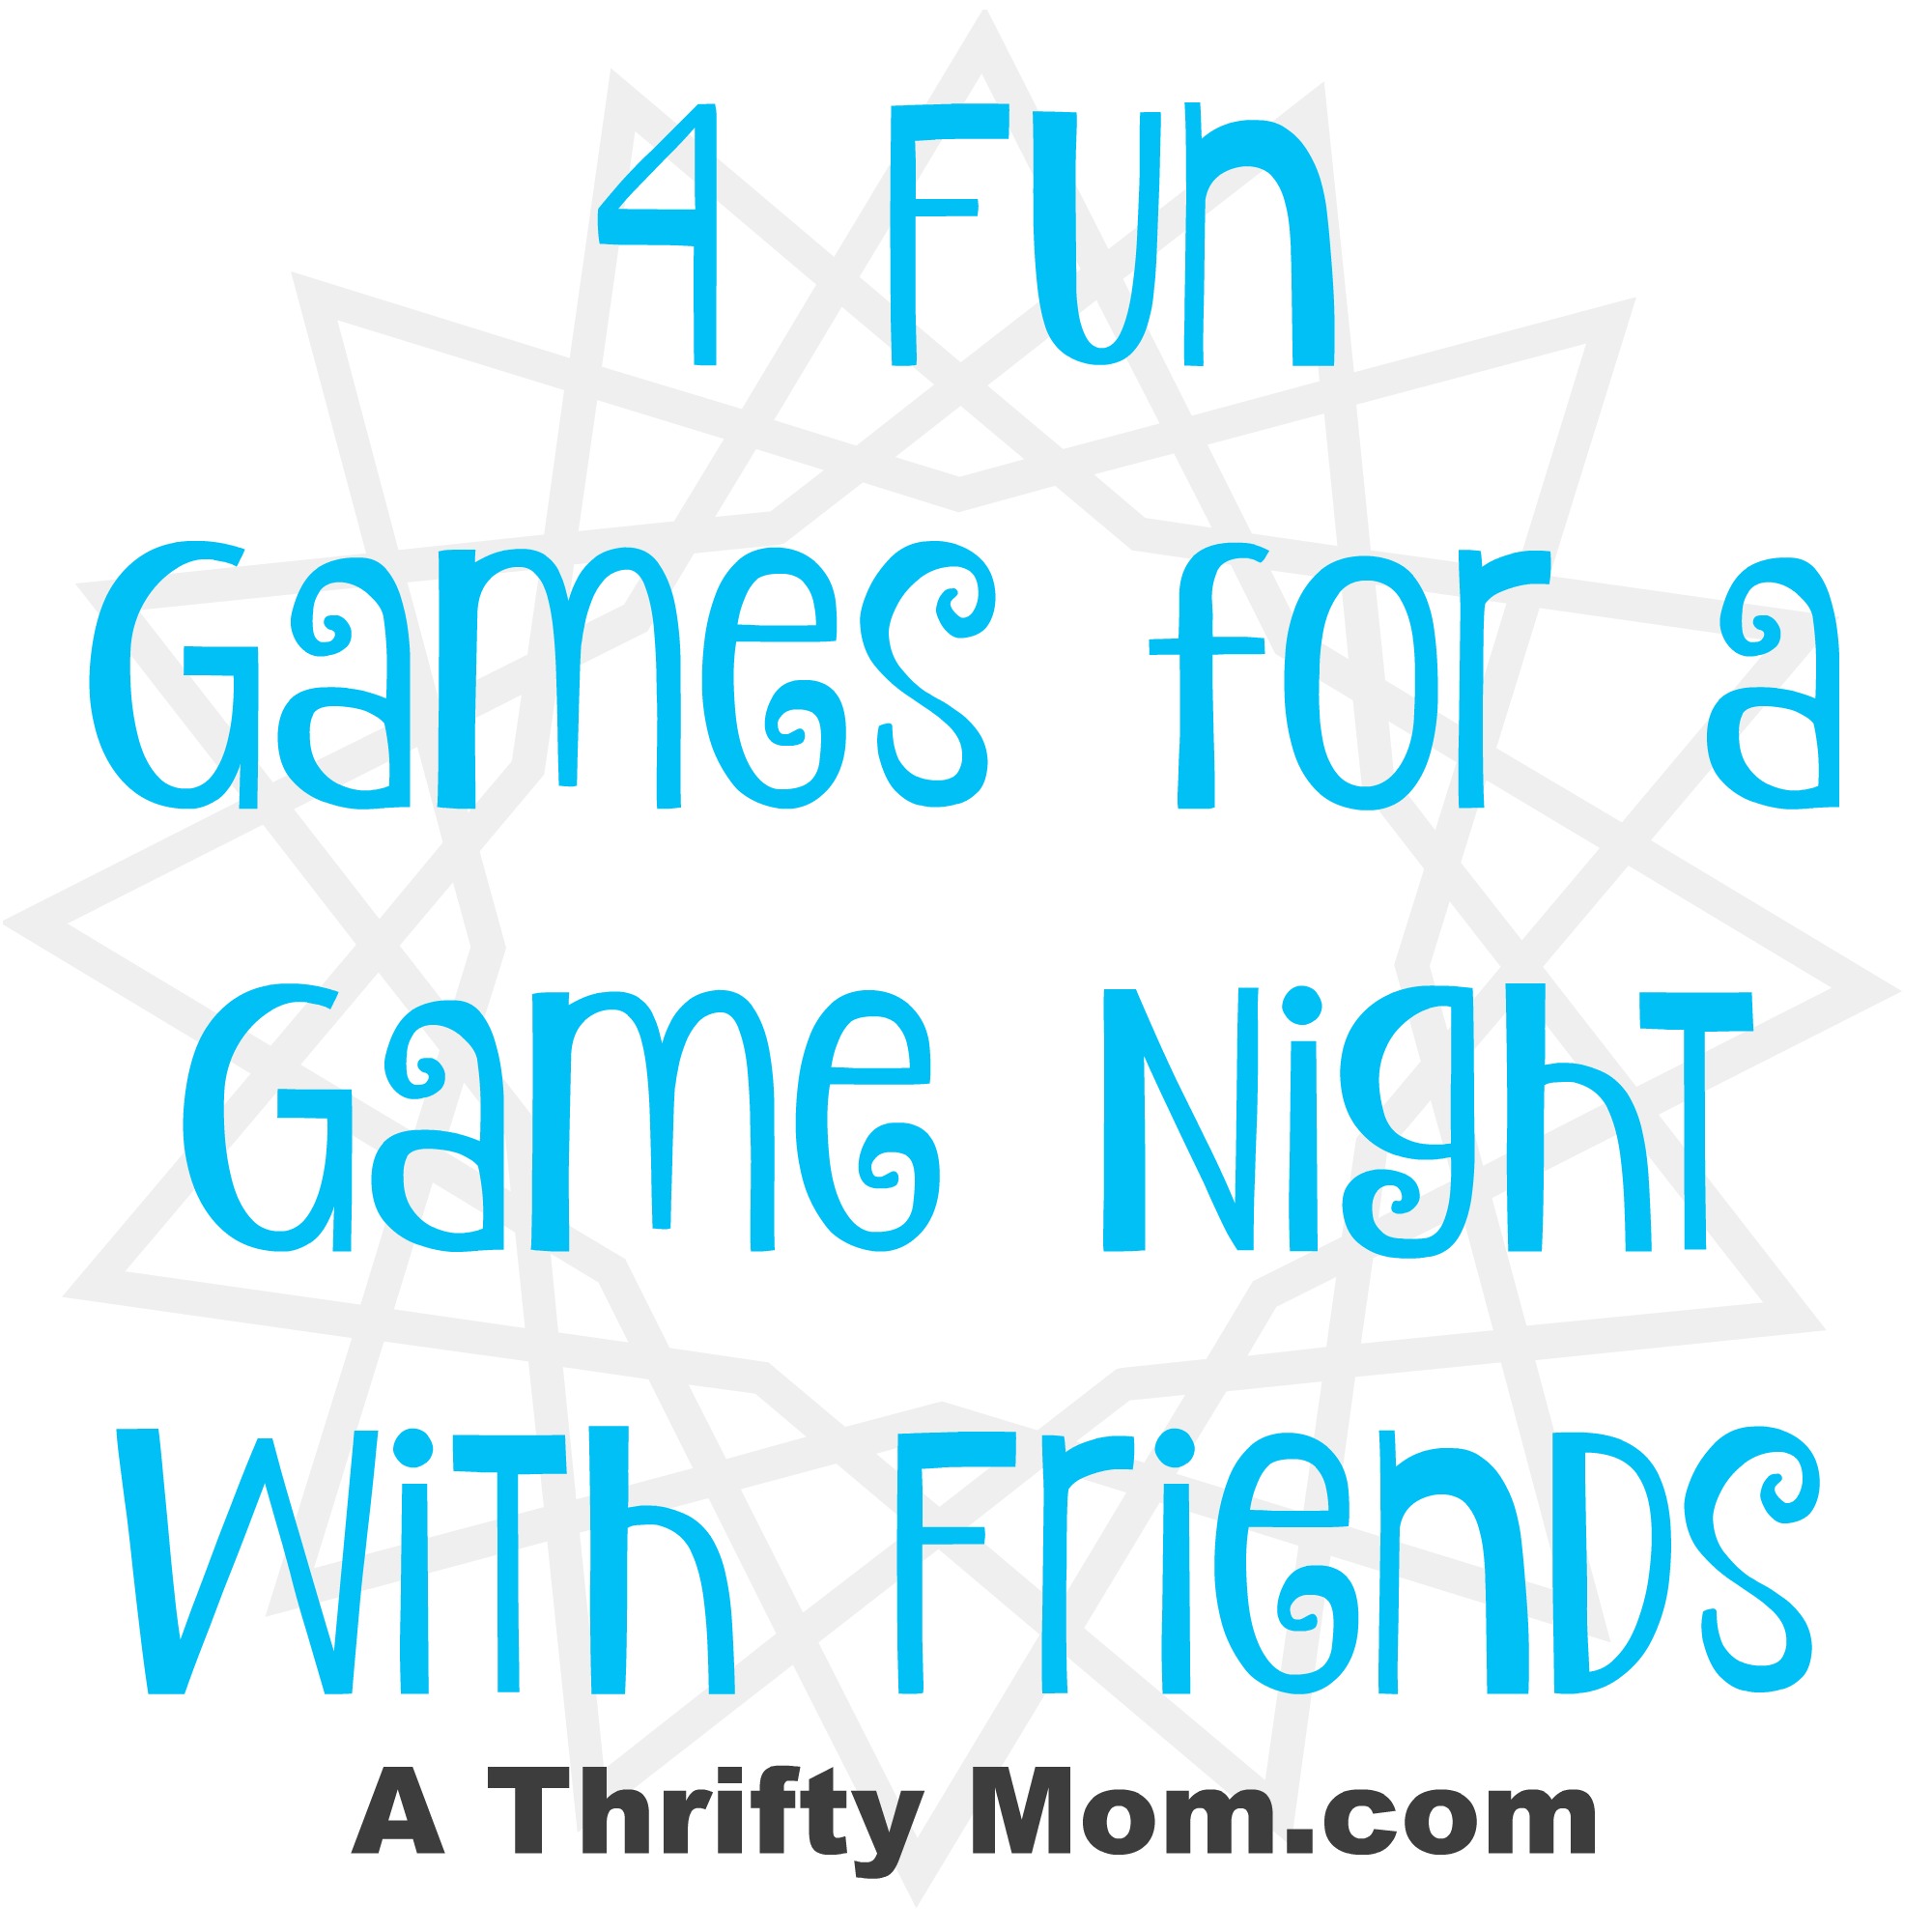 Games for a Game Night with Friends